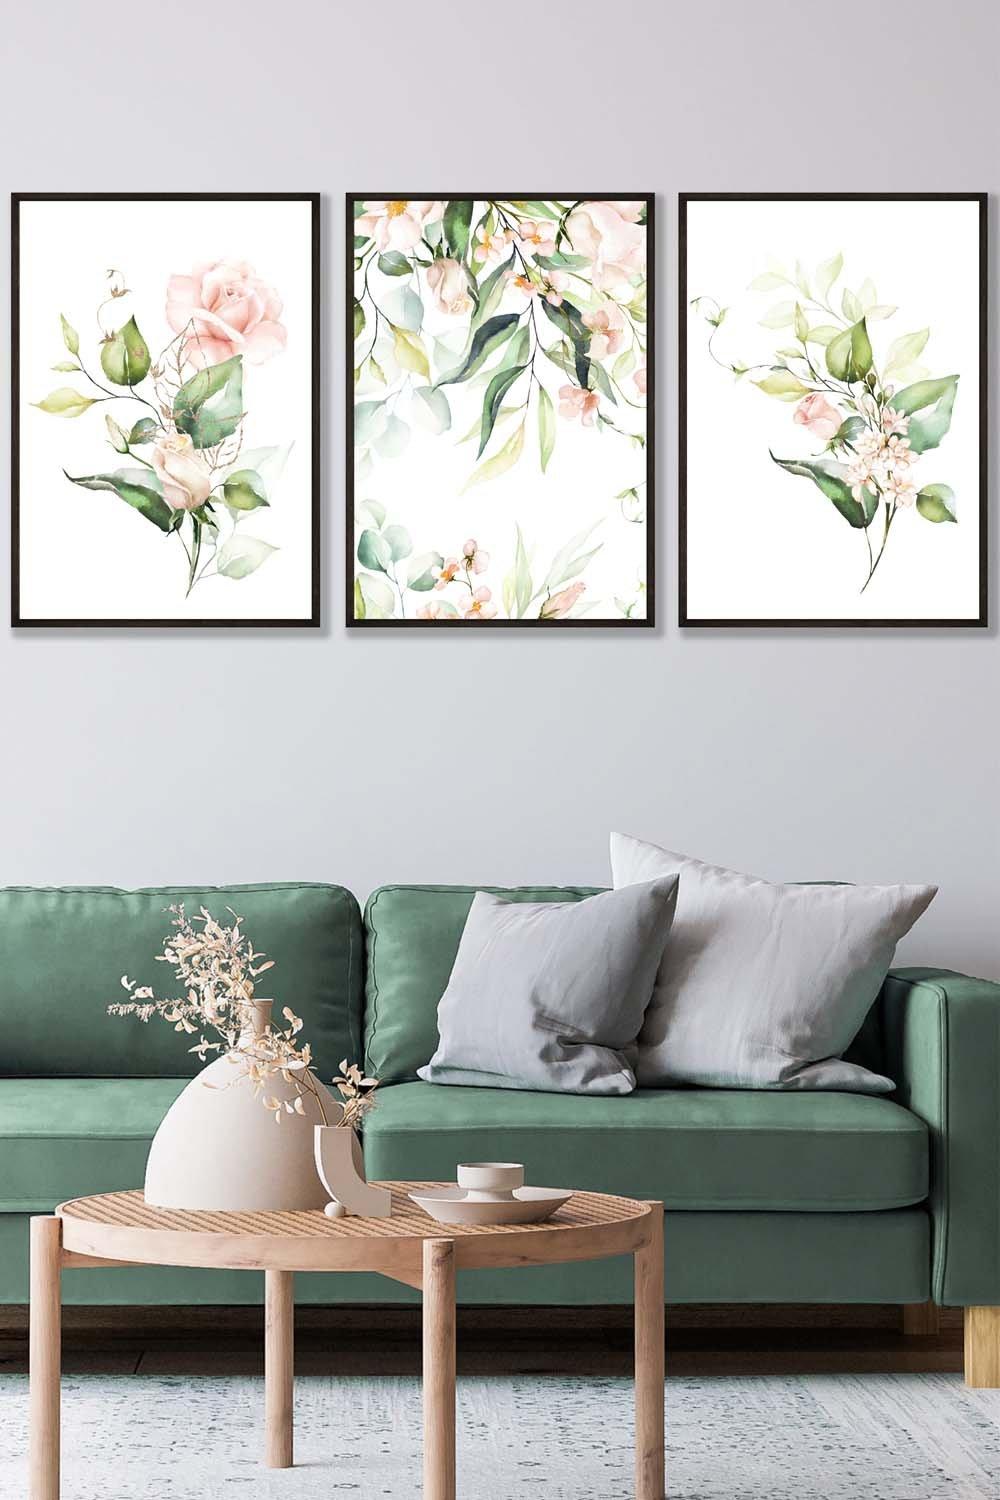 Set of 3 Black Framed Pink Watercolour Rose Bouquets Wall Art